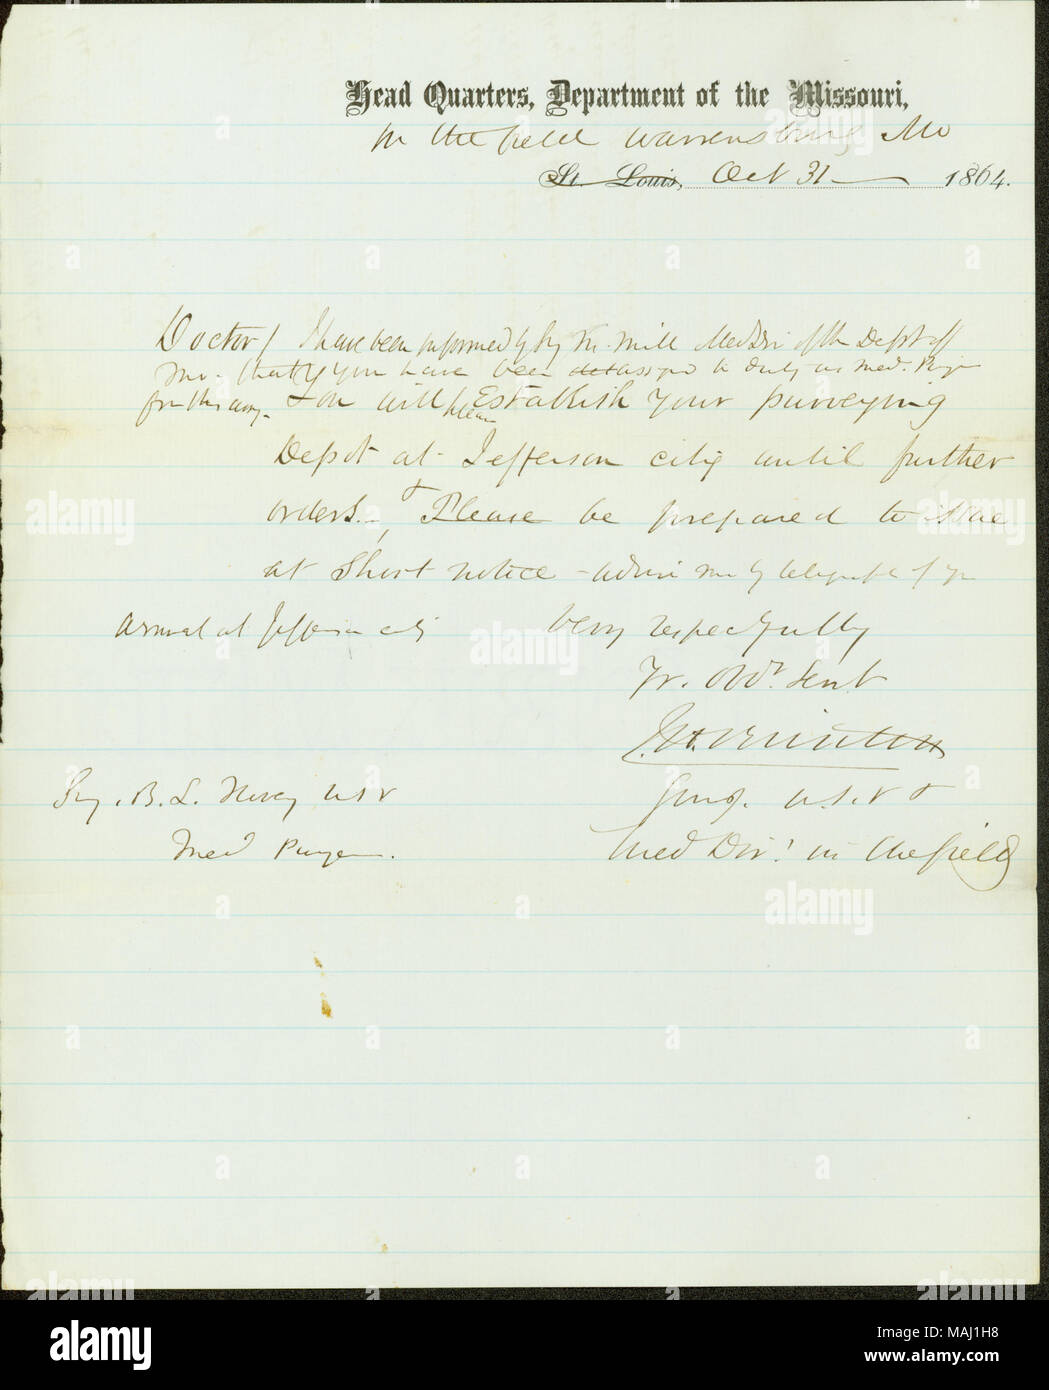 Acknowledges Nivey's appointment as Medical Purveyor. States that Nivey should set up his purveying department at Jefferson City, Missouri, until further notice. Title: Note signed John Brinton, Head Quarters, Department of the Missouri, in the field, Warrensburg, Mo., to B.L. Nivey, October 31, 1864  . 31 October 1864. Brinton, John H. (John Hill), 1832-1907 Stock Photo